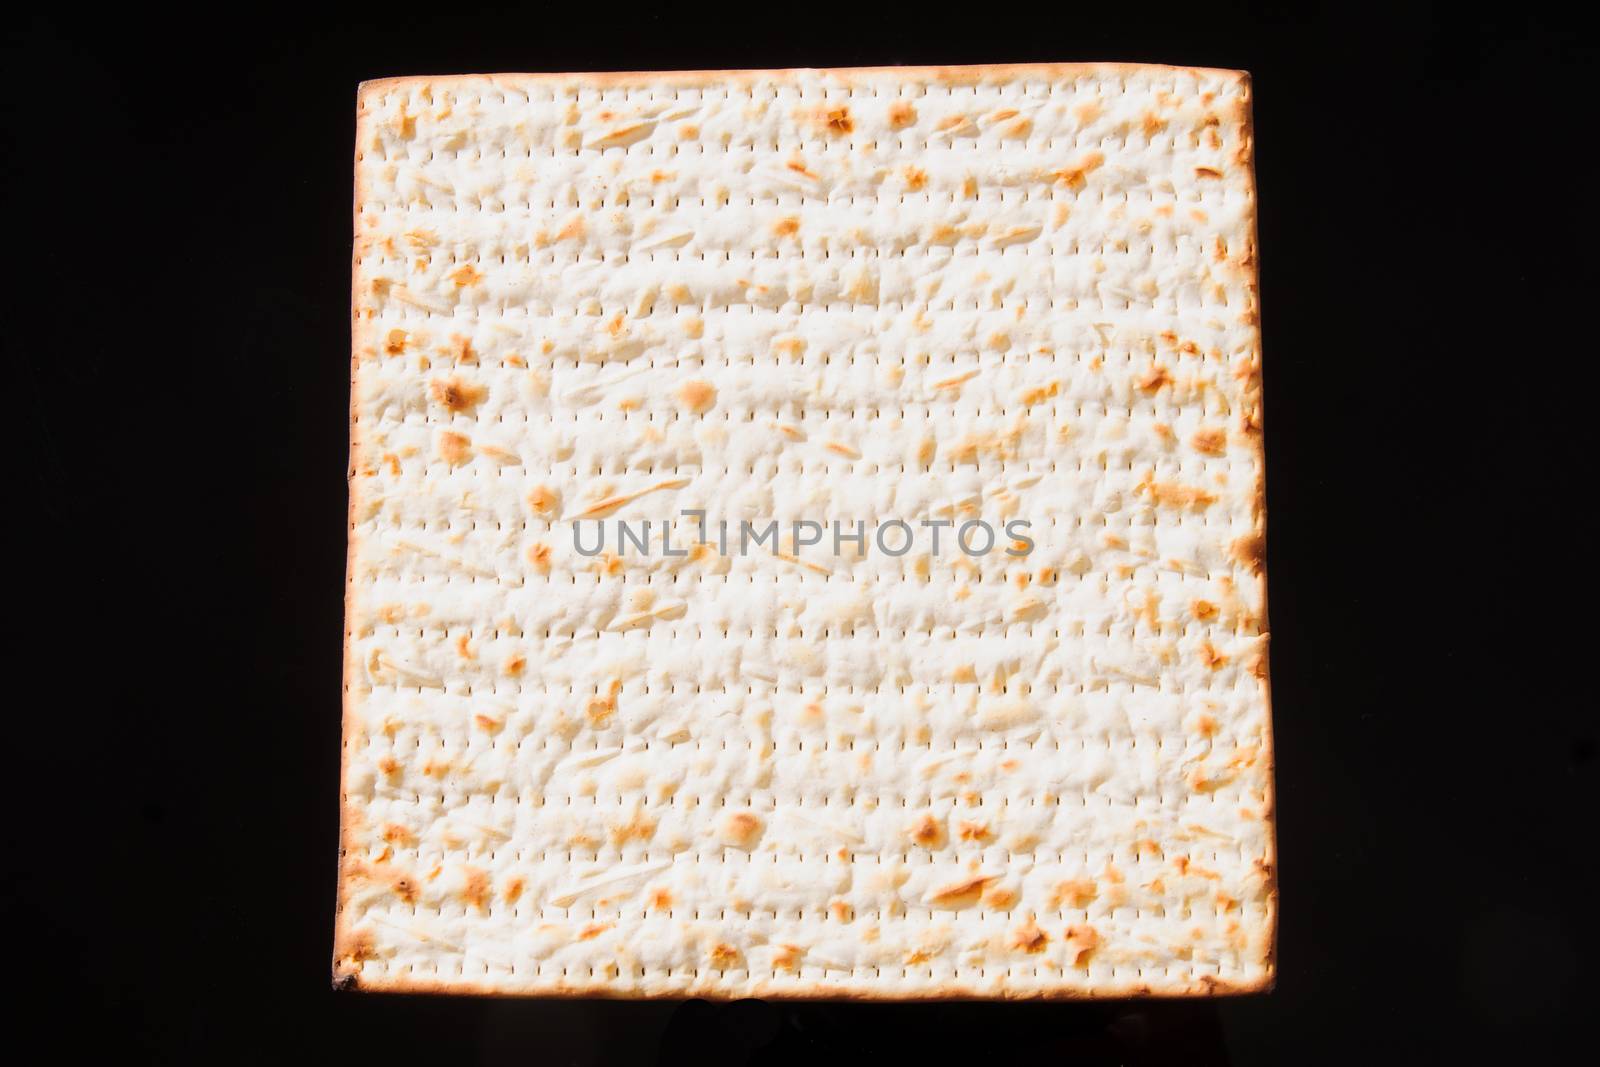 Matzo - A traditional Jewish Passover bread on a black background